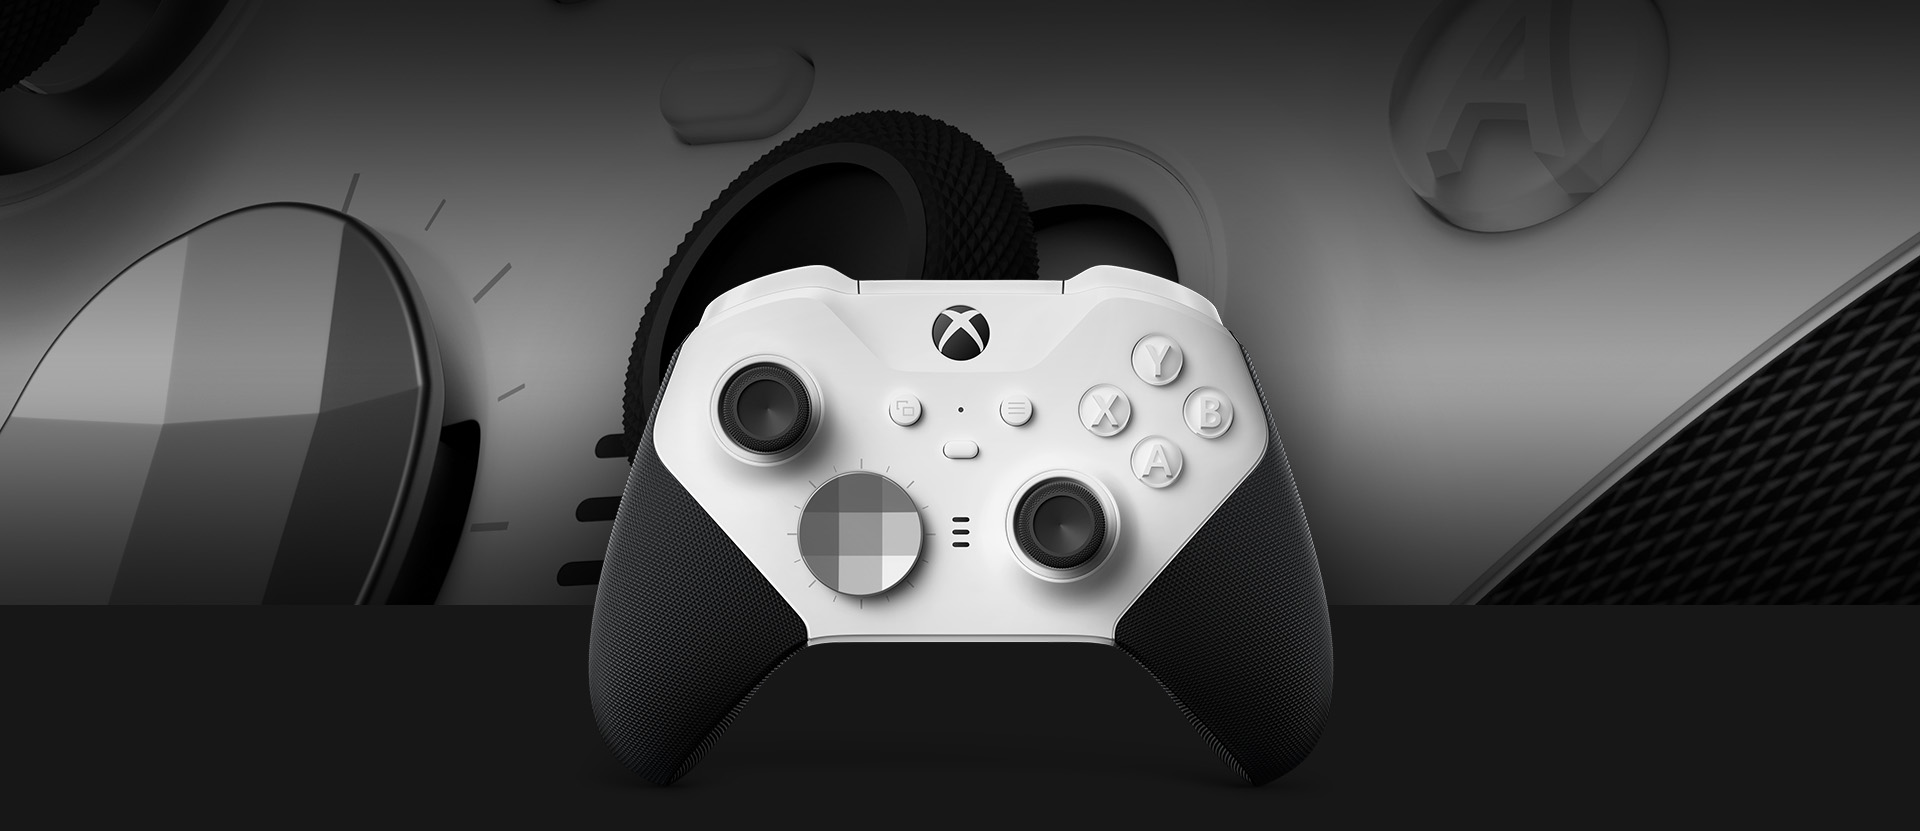 Microsoft's Elite Series 2 Xbox controller hits lowest price in months at  $158 (Reg. $180)